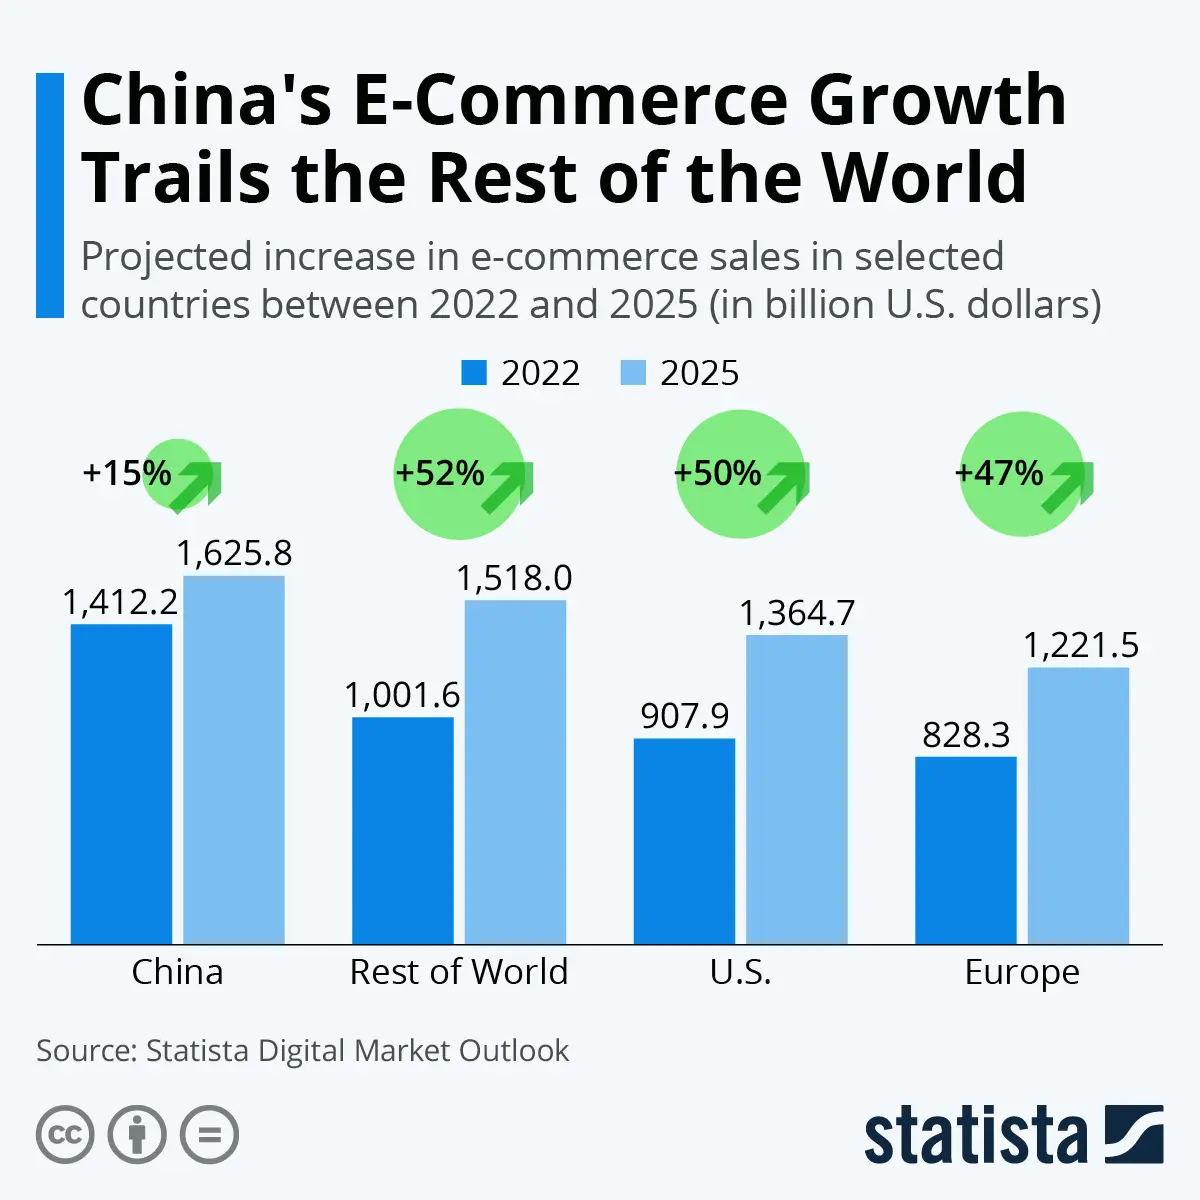 China holds the leading position in e-commerce